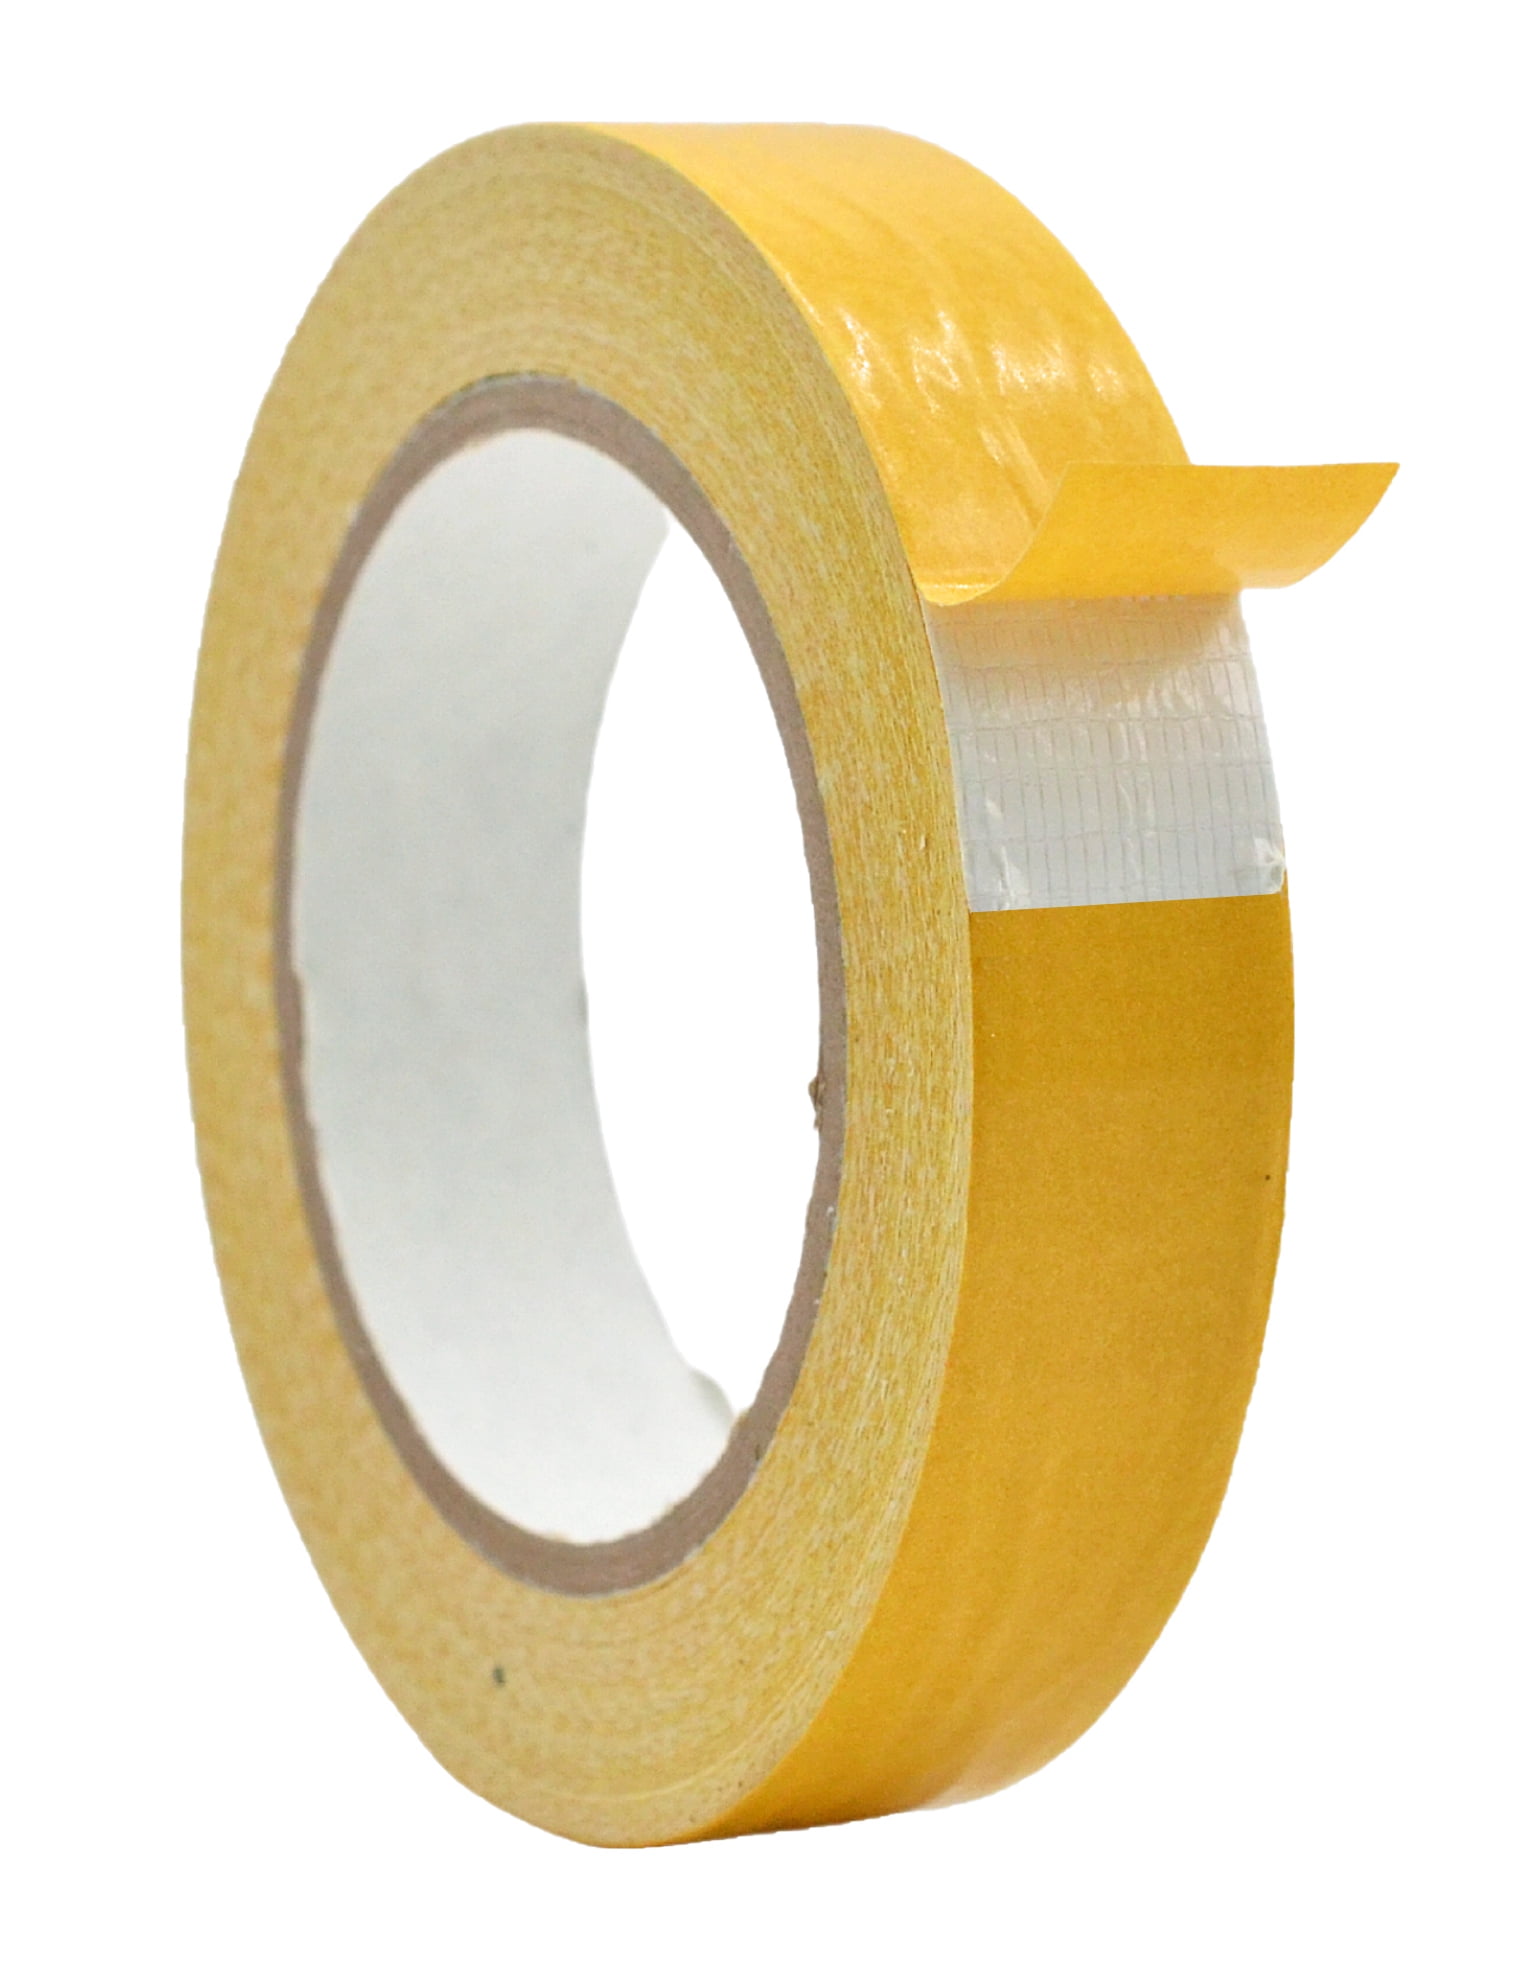 White Polyester Fabric on a Gold Siliconized Paper Liner: 1 in Pack of 1 WOD DC-5215 Double Sided Carpet Tape Removable x 36 yds